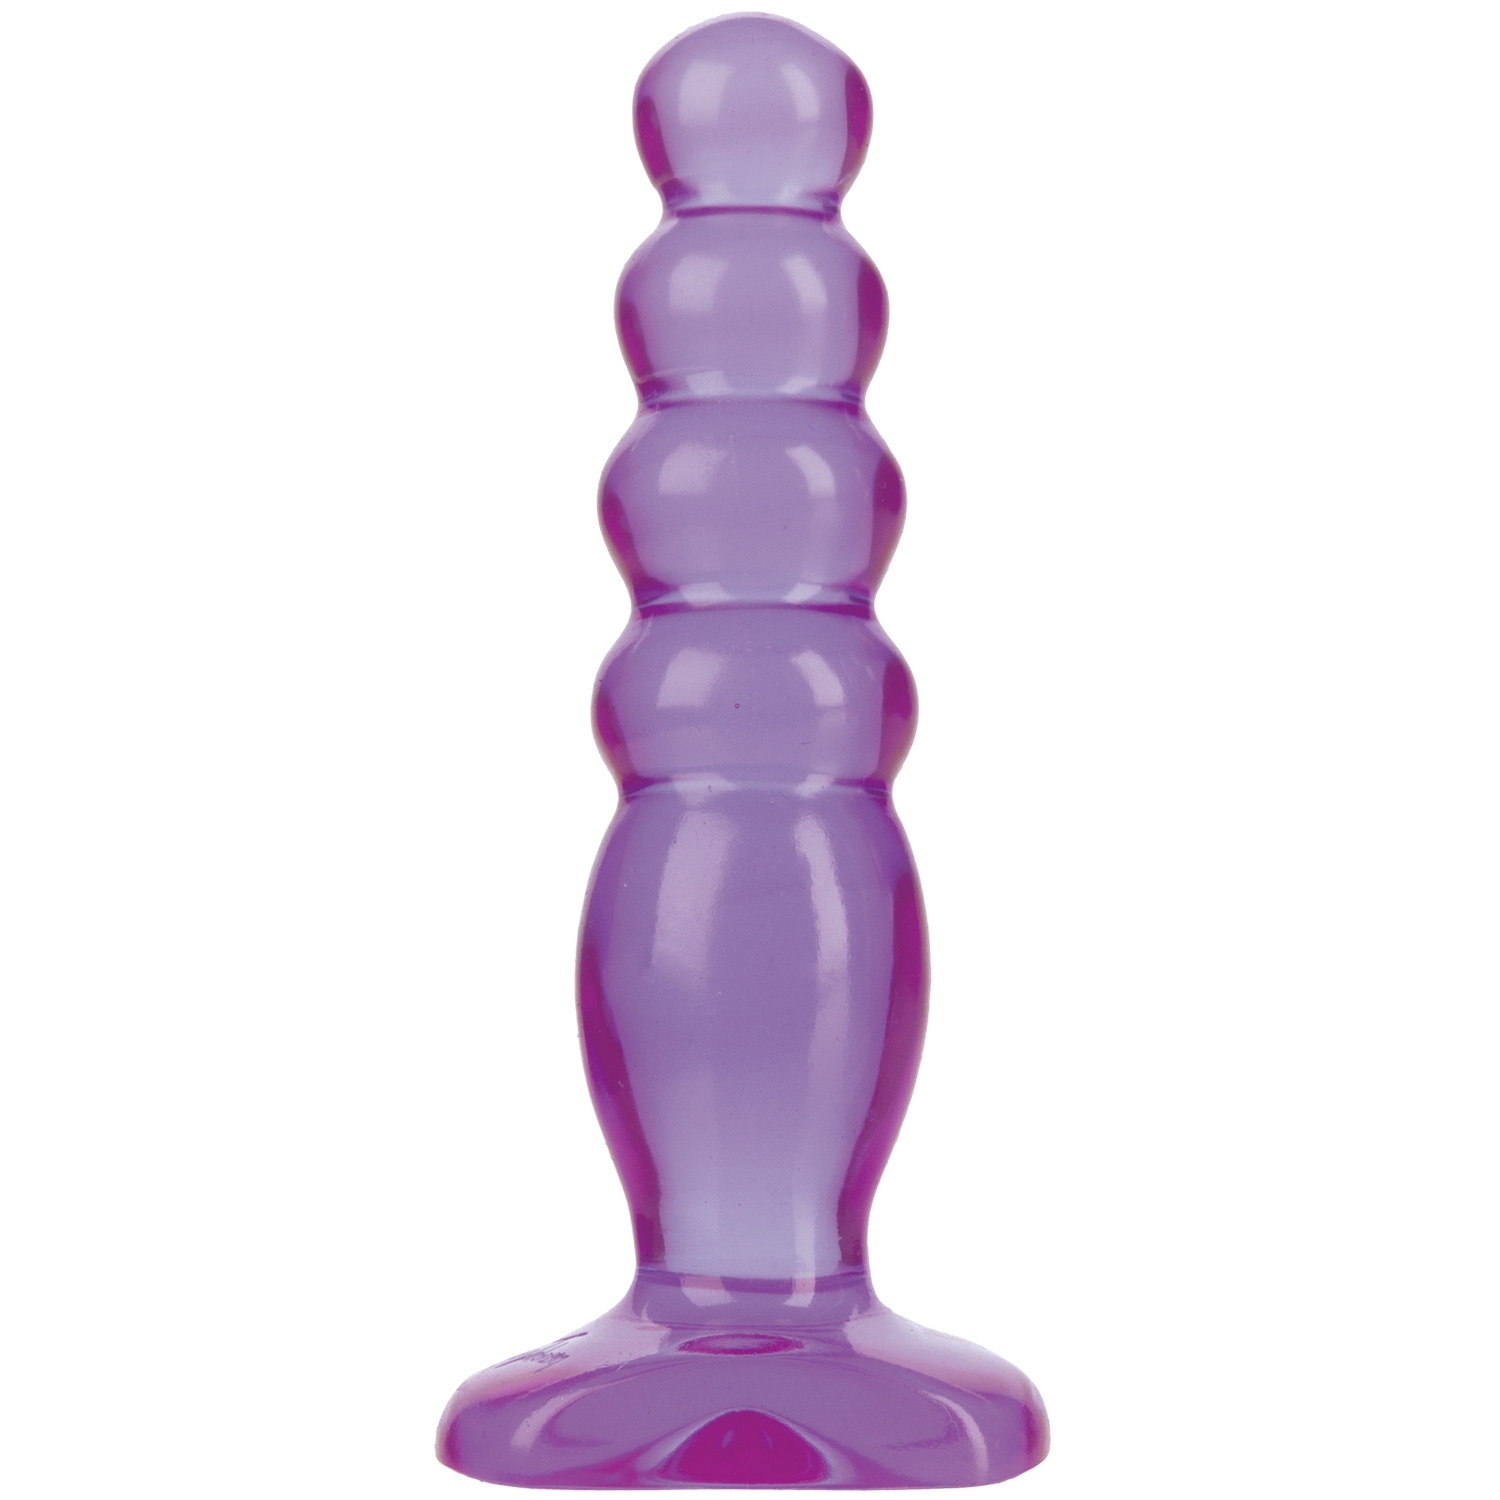 Doc Johnson Crystal Jellies Anal Delight Buttplugg - Lilla